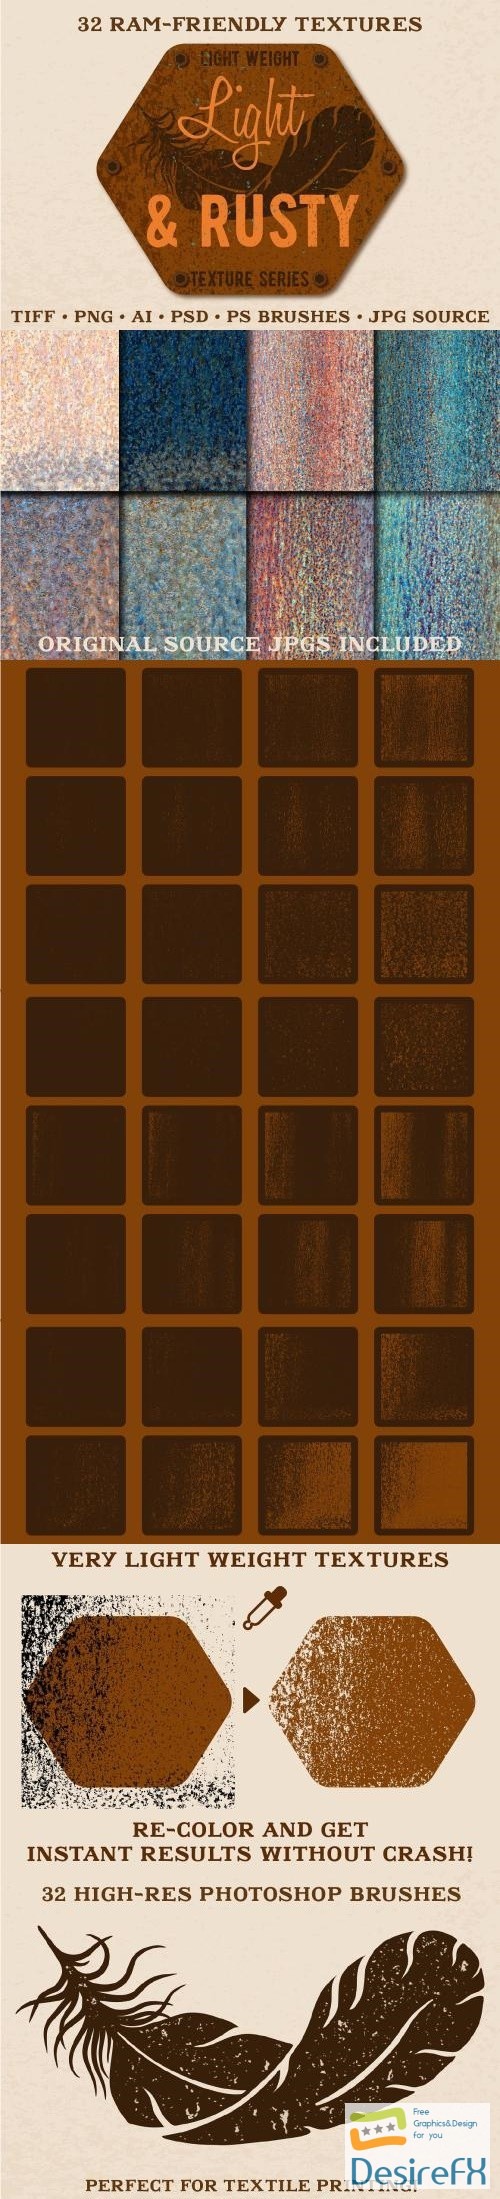 Light and Rusty Texture Pack - 2391269